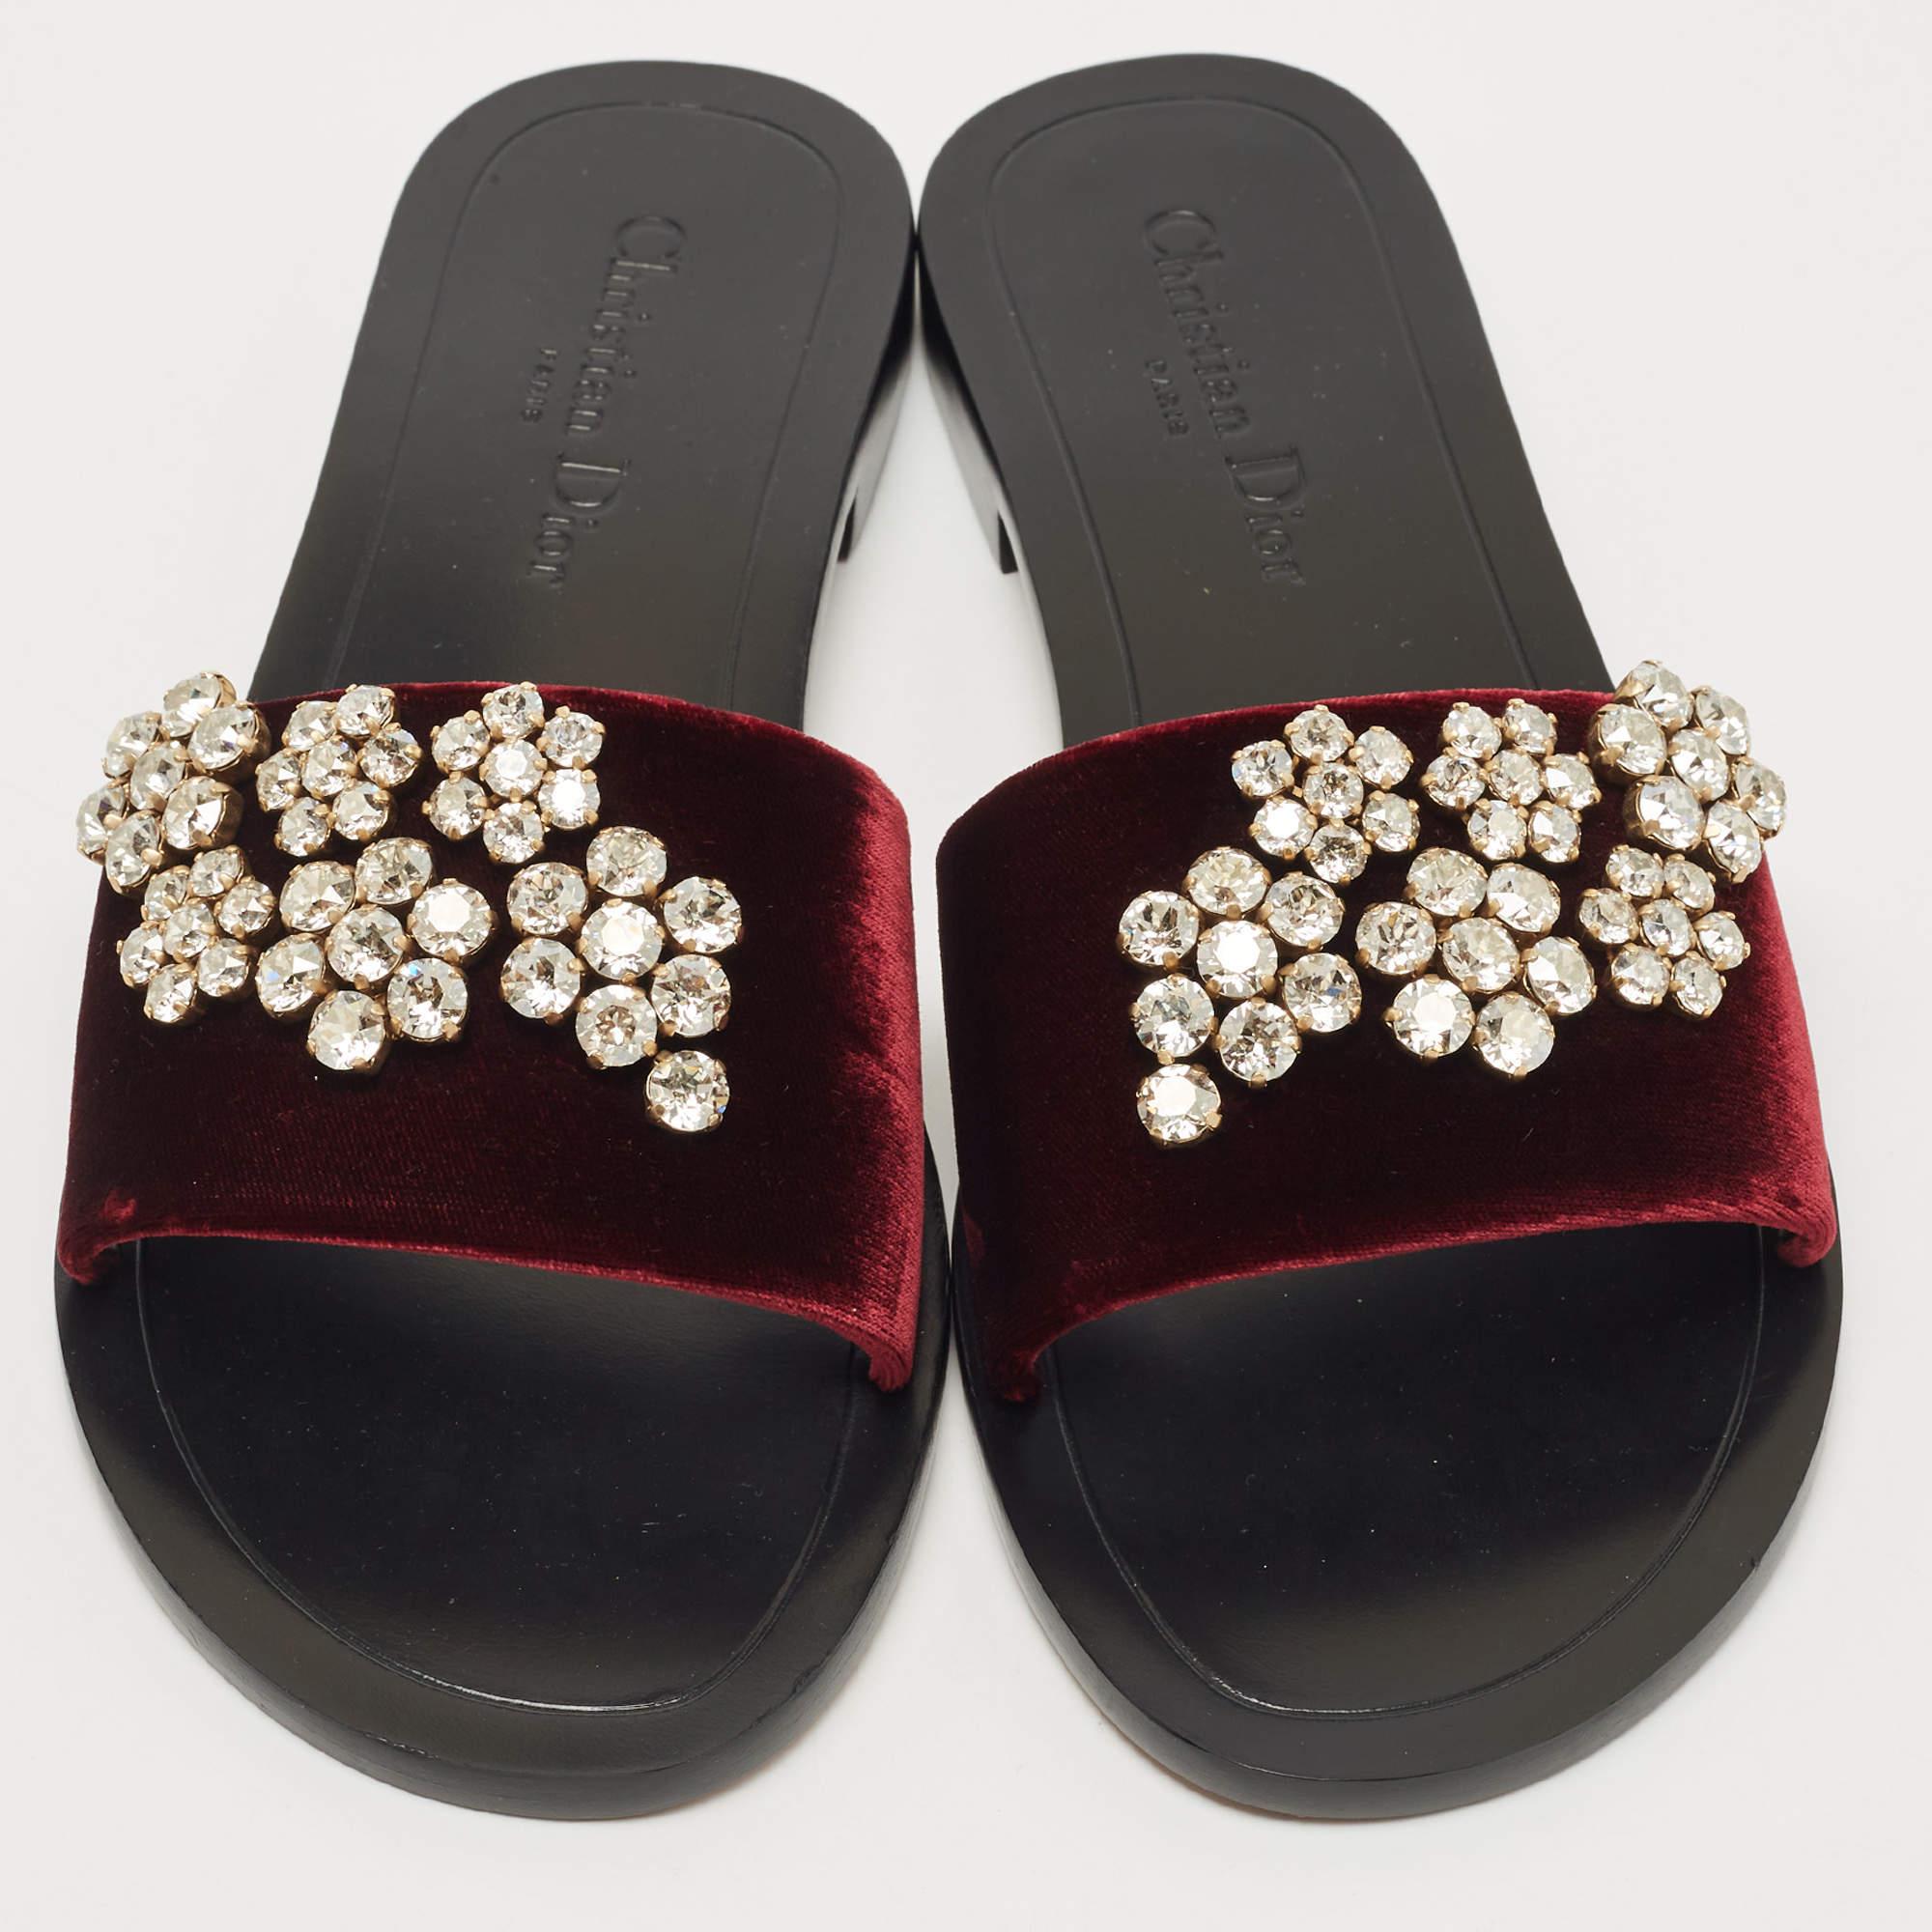 Dior's collections are a testament to the label's opulent and glamorous aesthetics. Crafted from velvet in a burgundy shade, the flats are decorated with crystal embellishments. They will look stunning with dresses.

